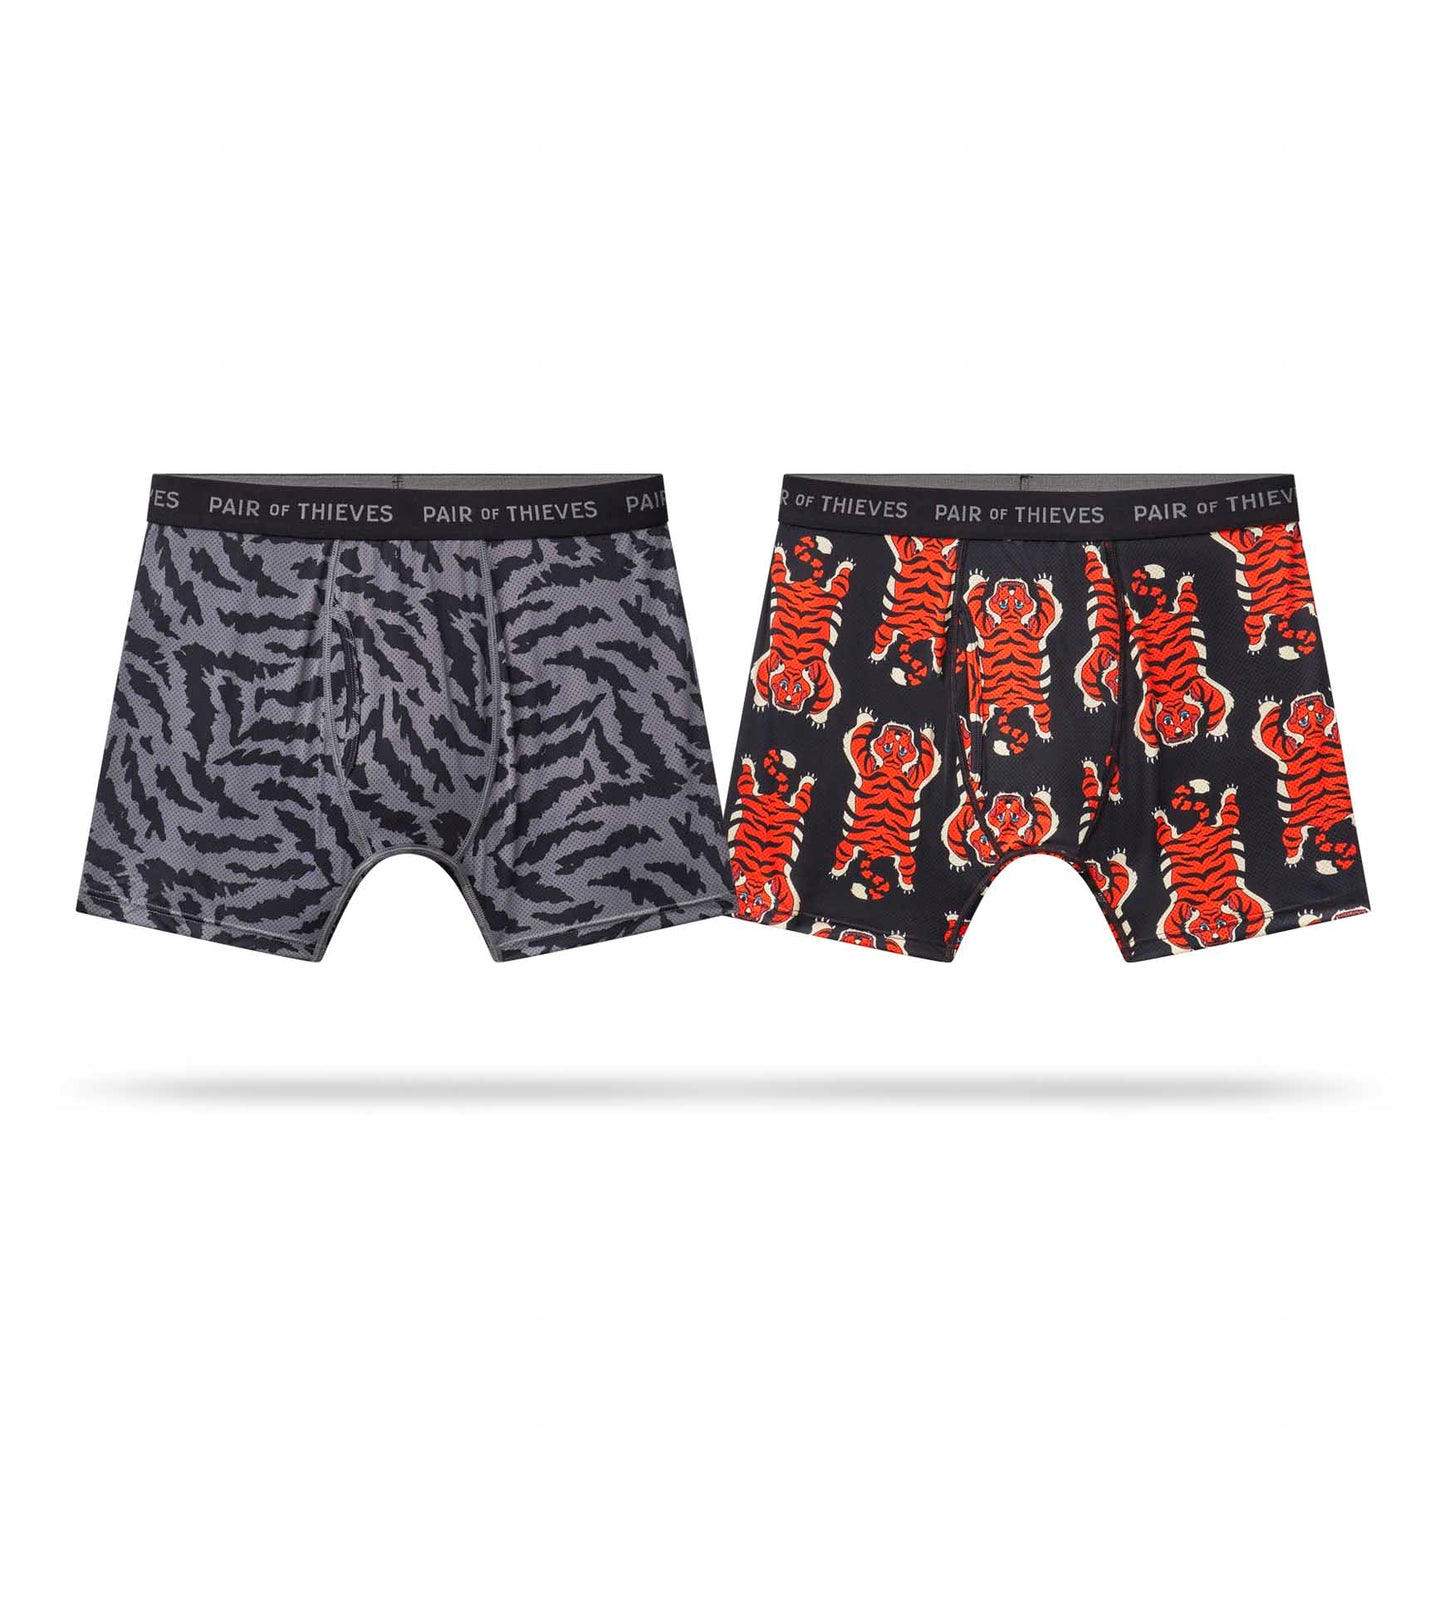 SuperFit Boxer Briefs 2 Pack Tiger Prince - Pair of Thieves